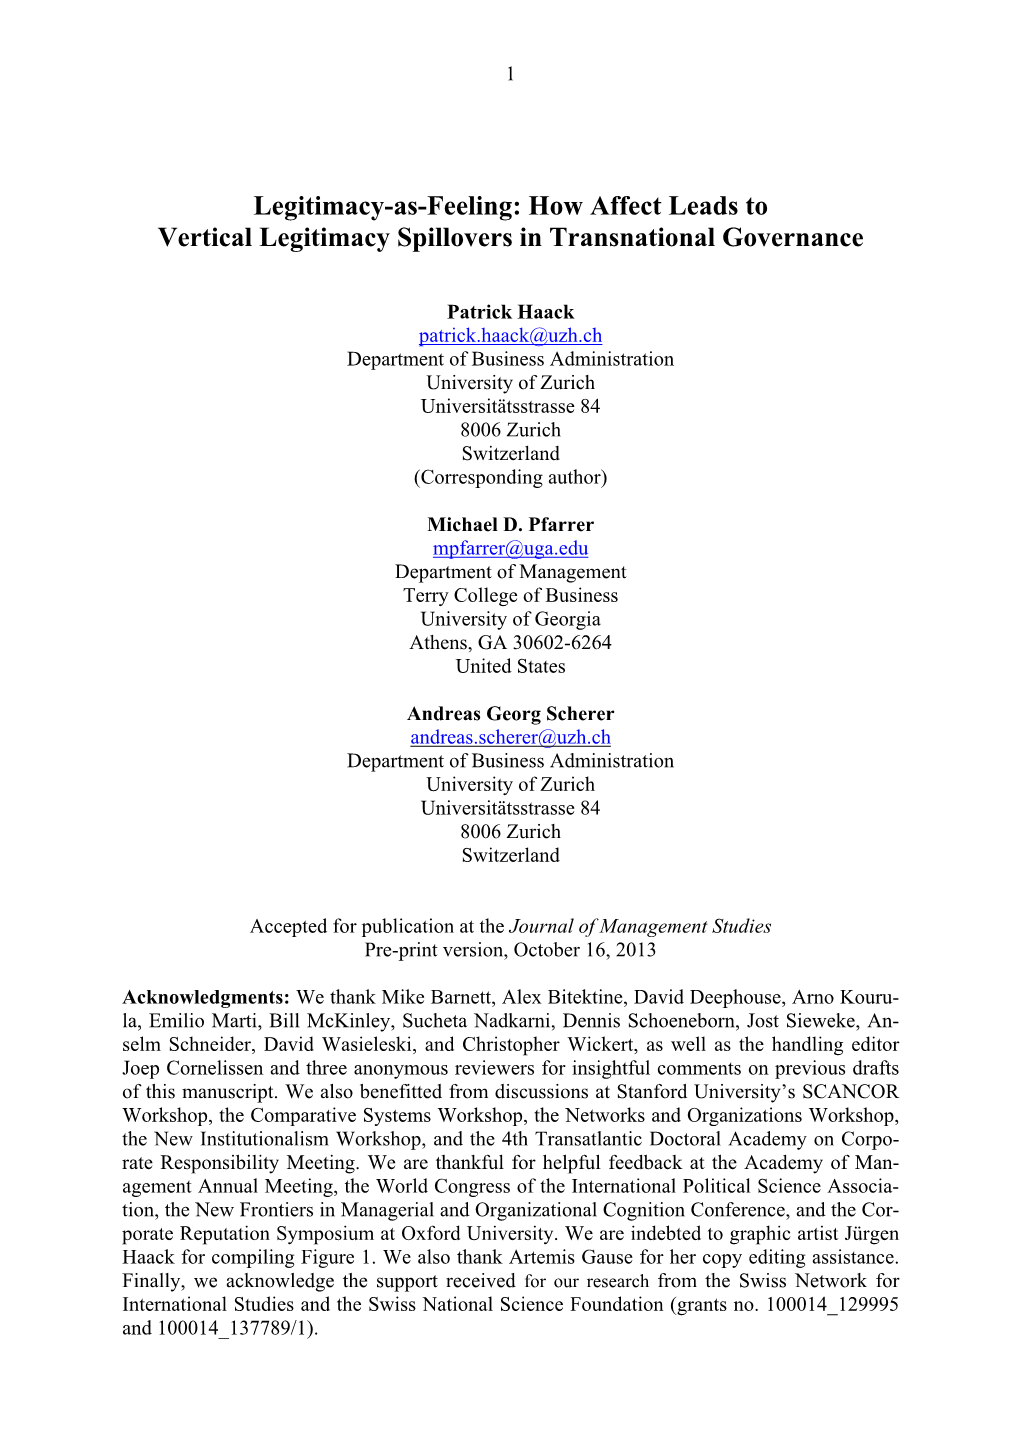 How Affect Leads to Vertical Legitimacy Spillovers in Transnational Governance